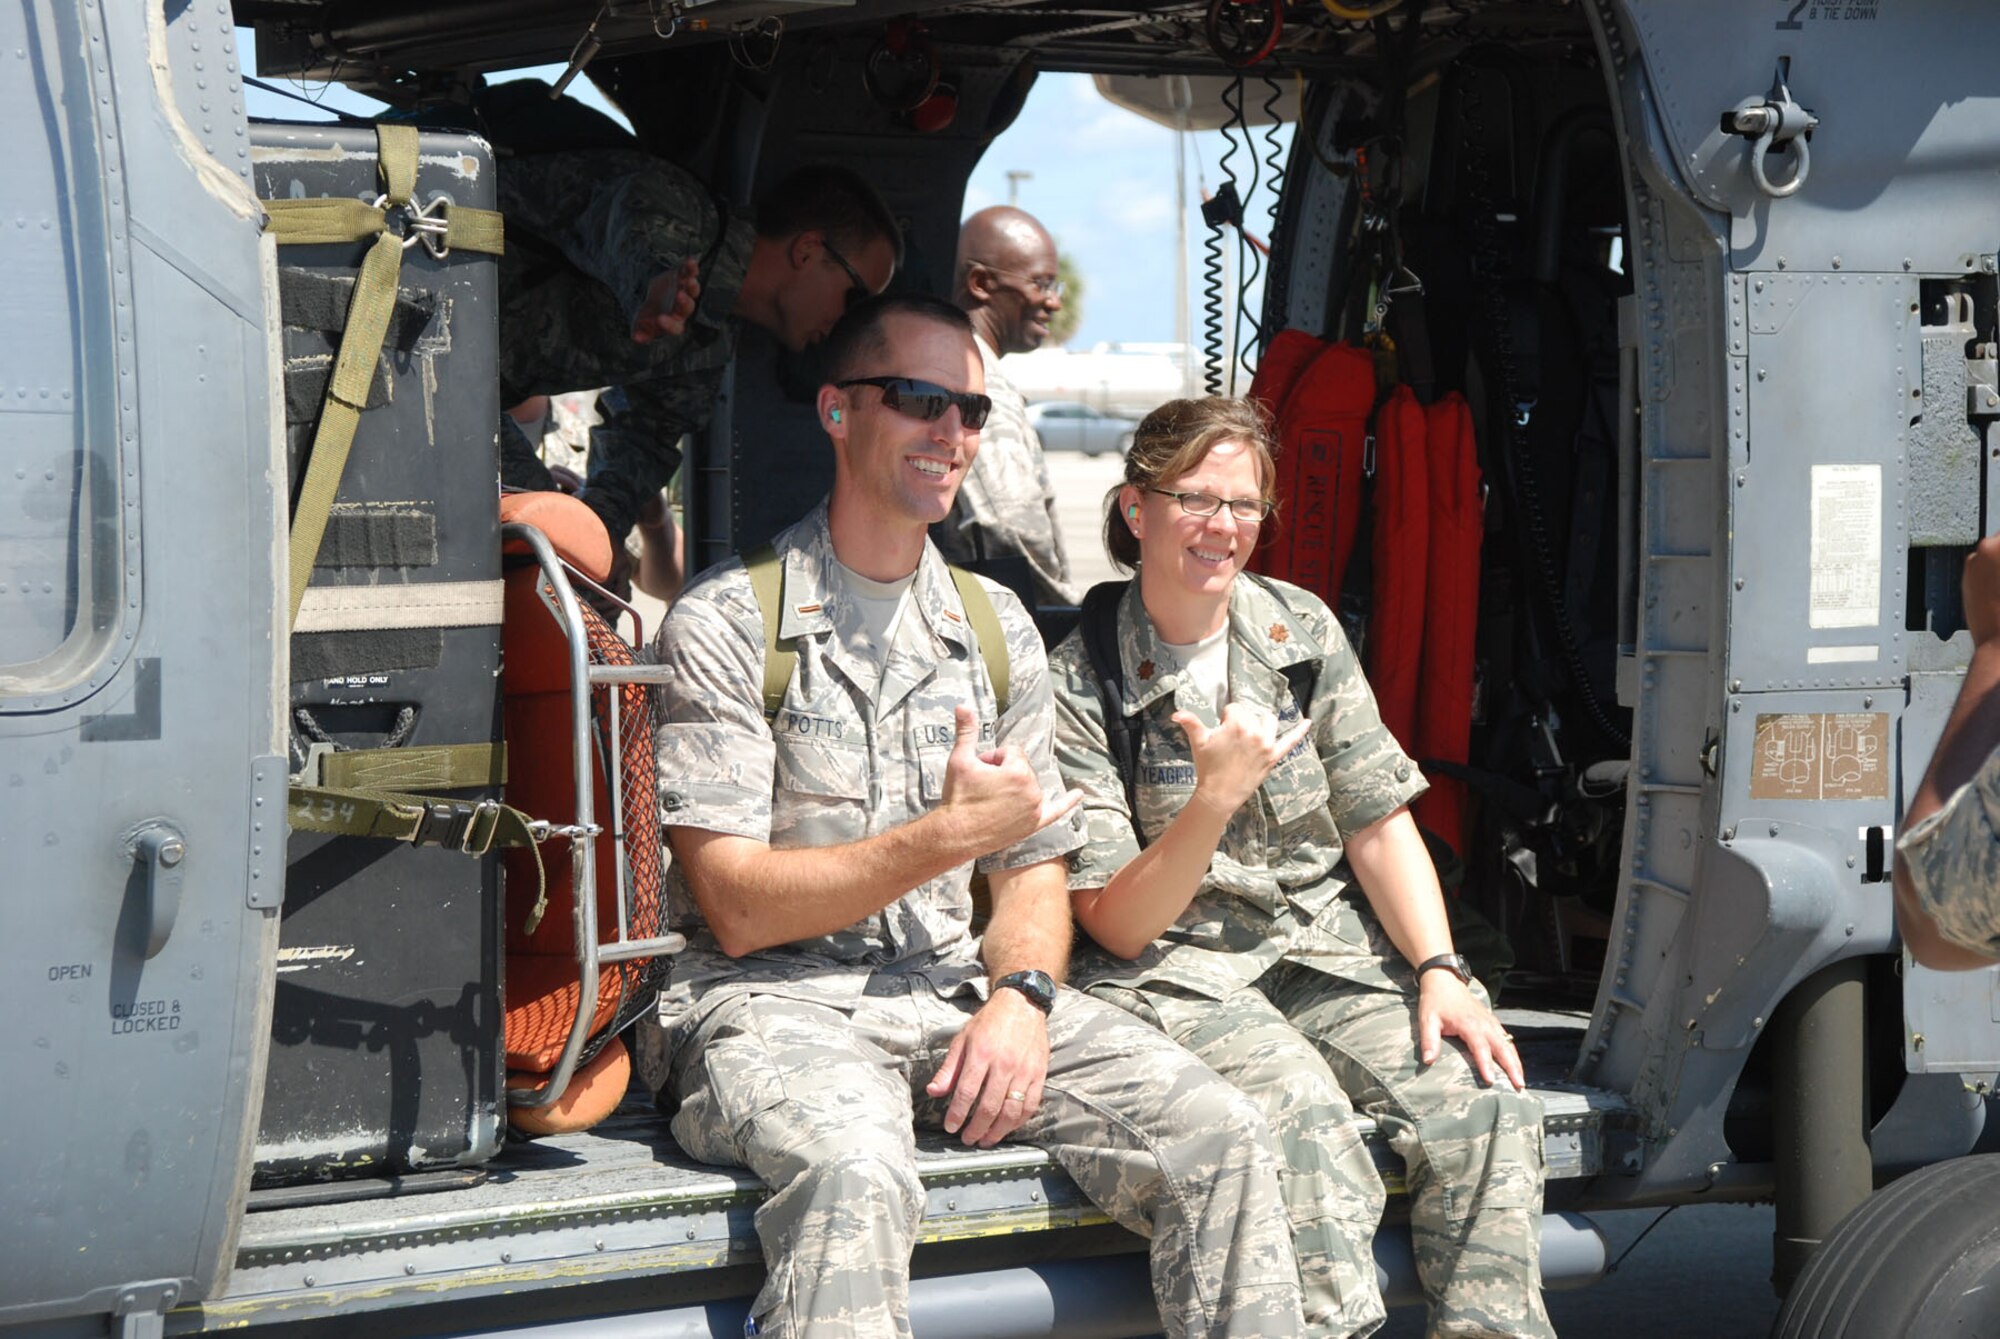 SEYMOUR JOHNSON AIR FORCE BASE, N.C. --  Maj. Carol Yeager (right), 916th Air Refueling Wing chaplain, serves as an escort for 30 chaplain candidates touring bases across the United States in late July and early August.